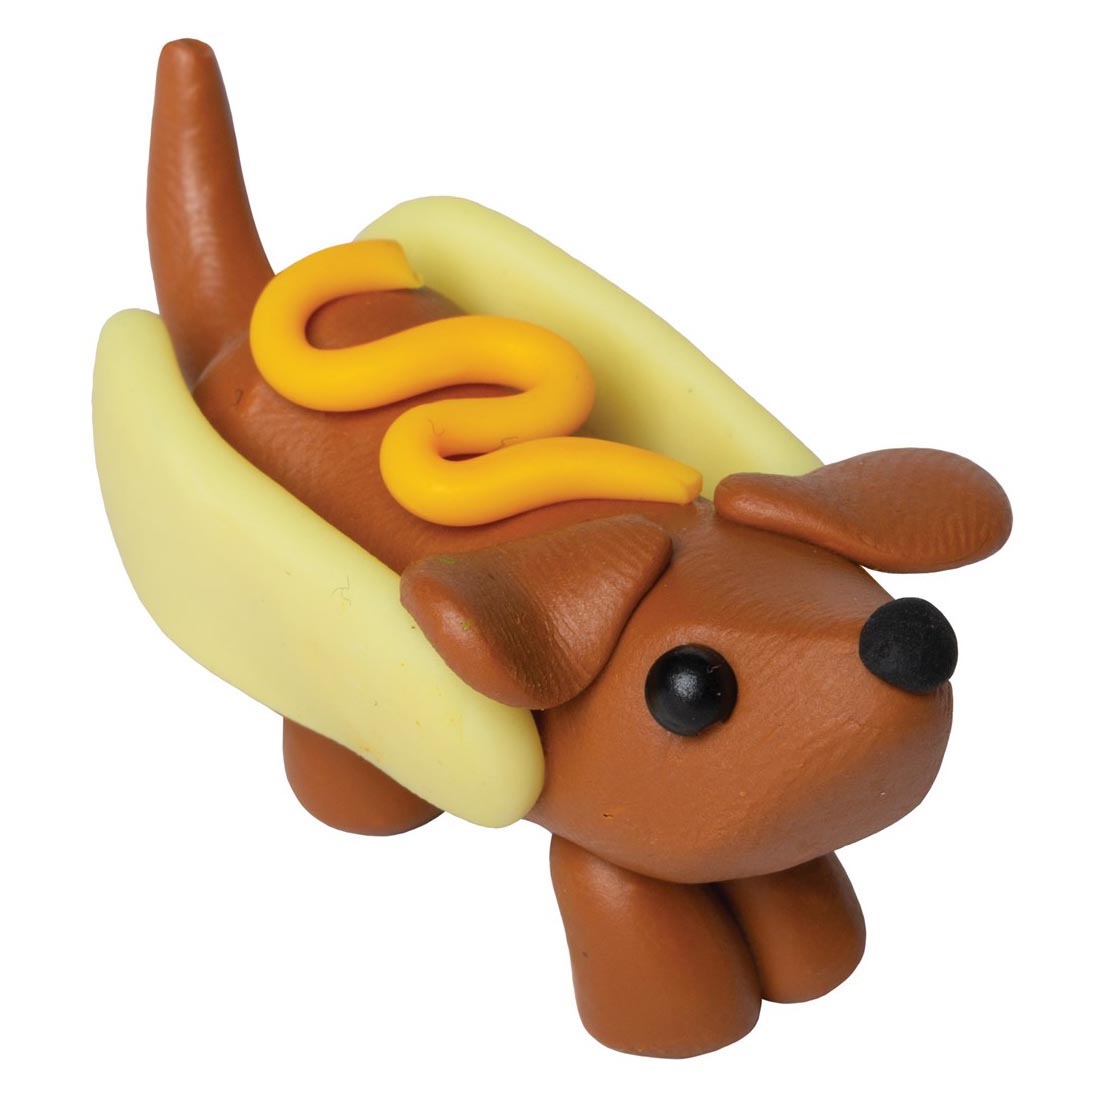 clay weiner dog in a bun with mustard on its back